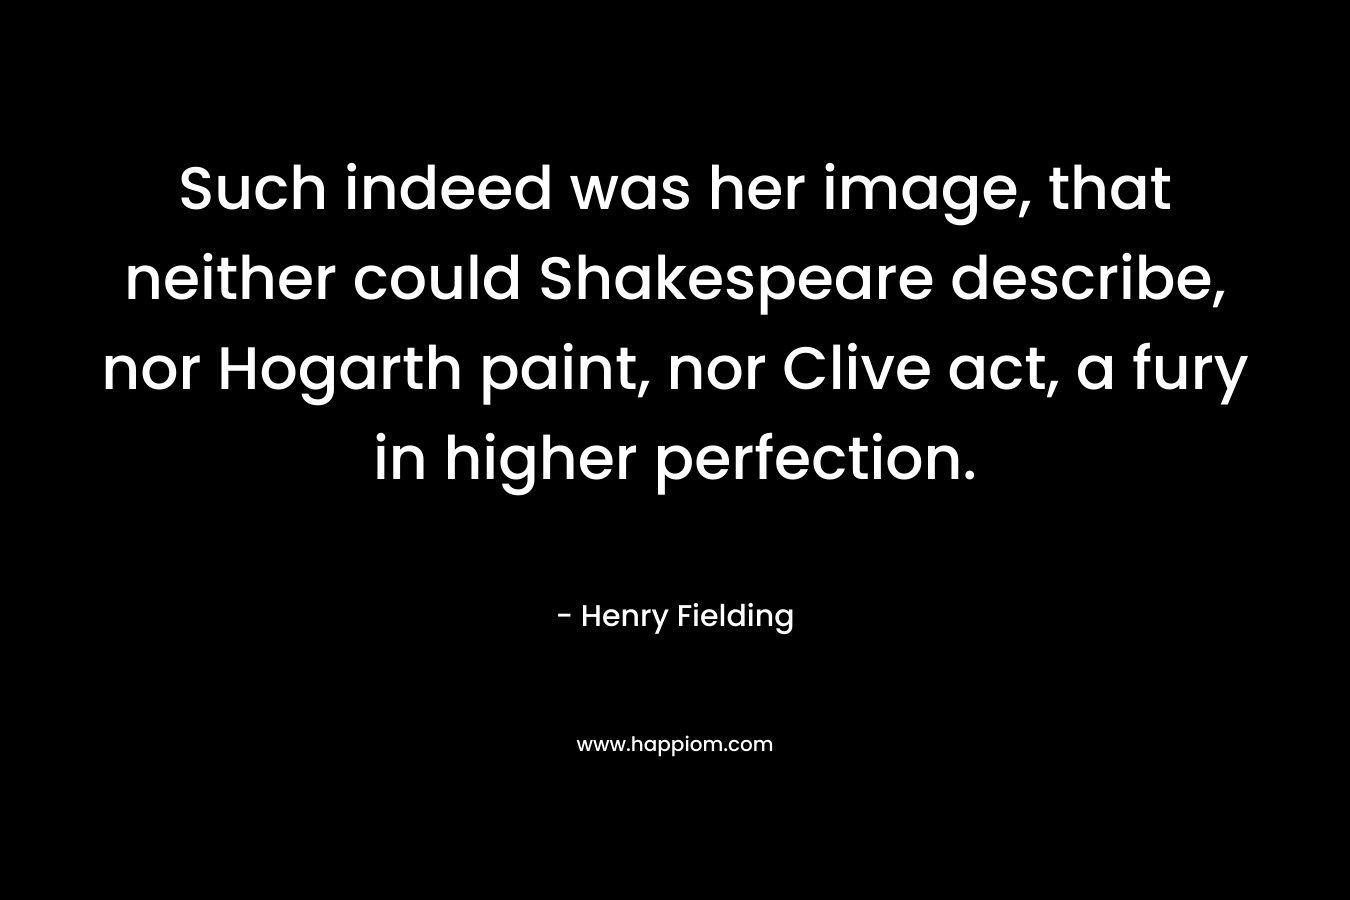 Such indeed was her image, that neither could Shakespeare describe, nor Hogarth paint, nor Clive act, a fury in higher perfection. – Henry Fielding